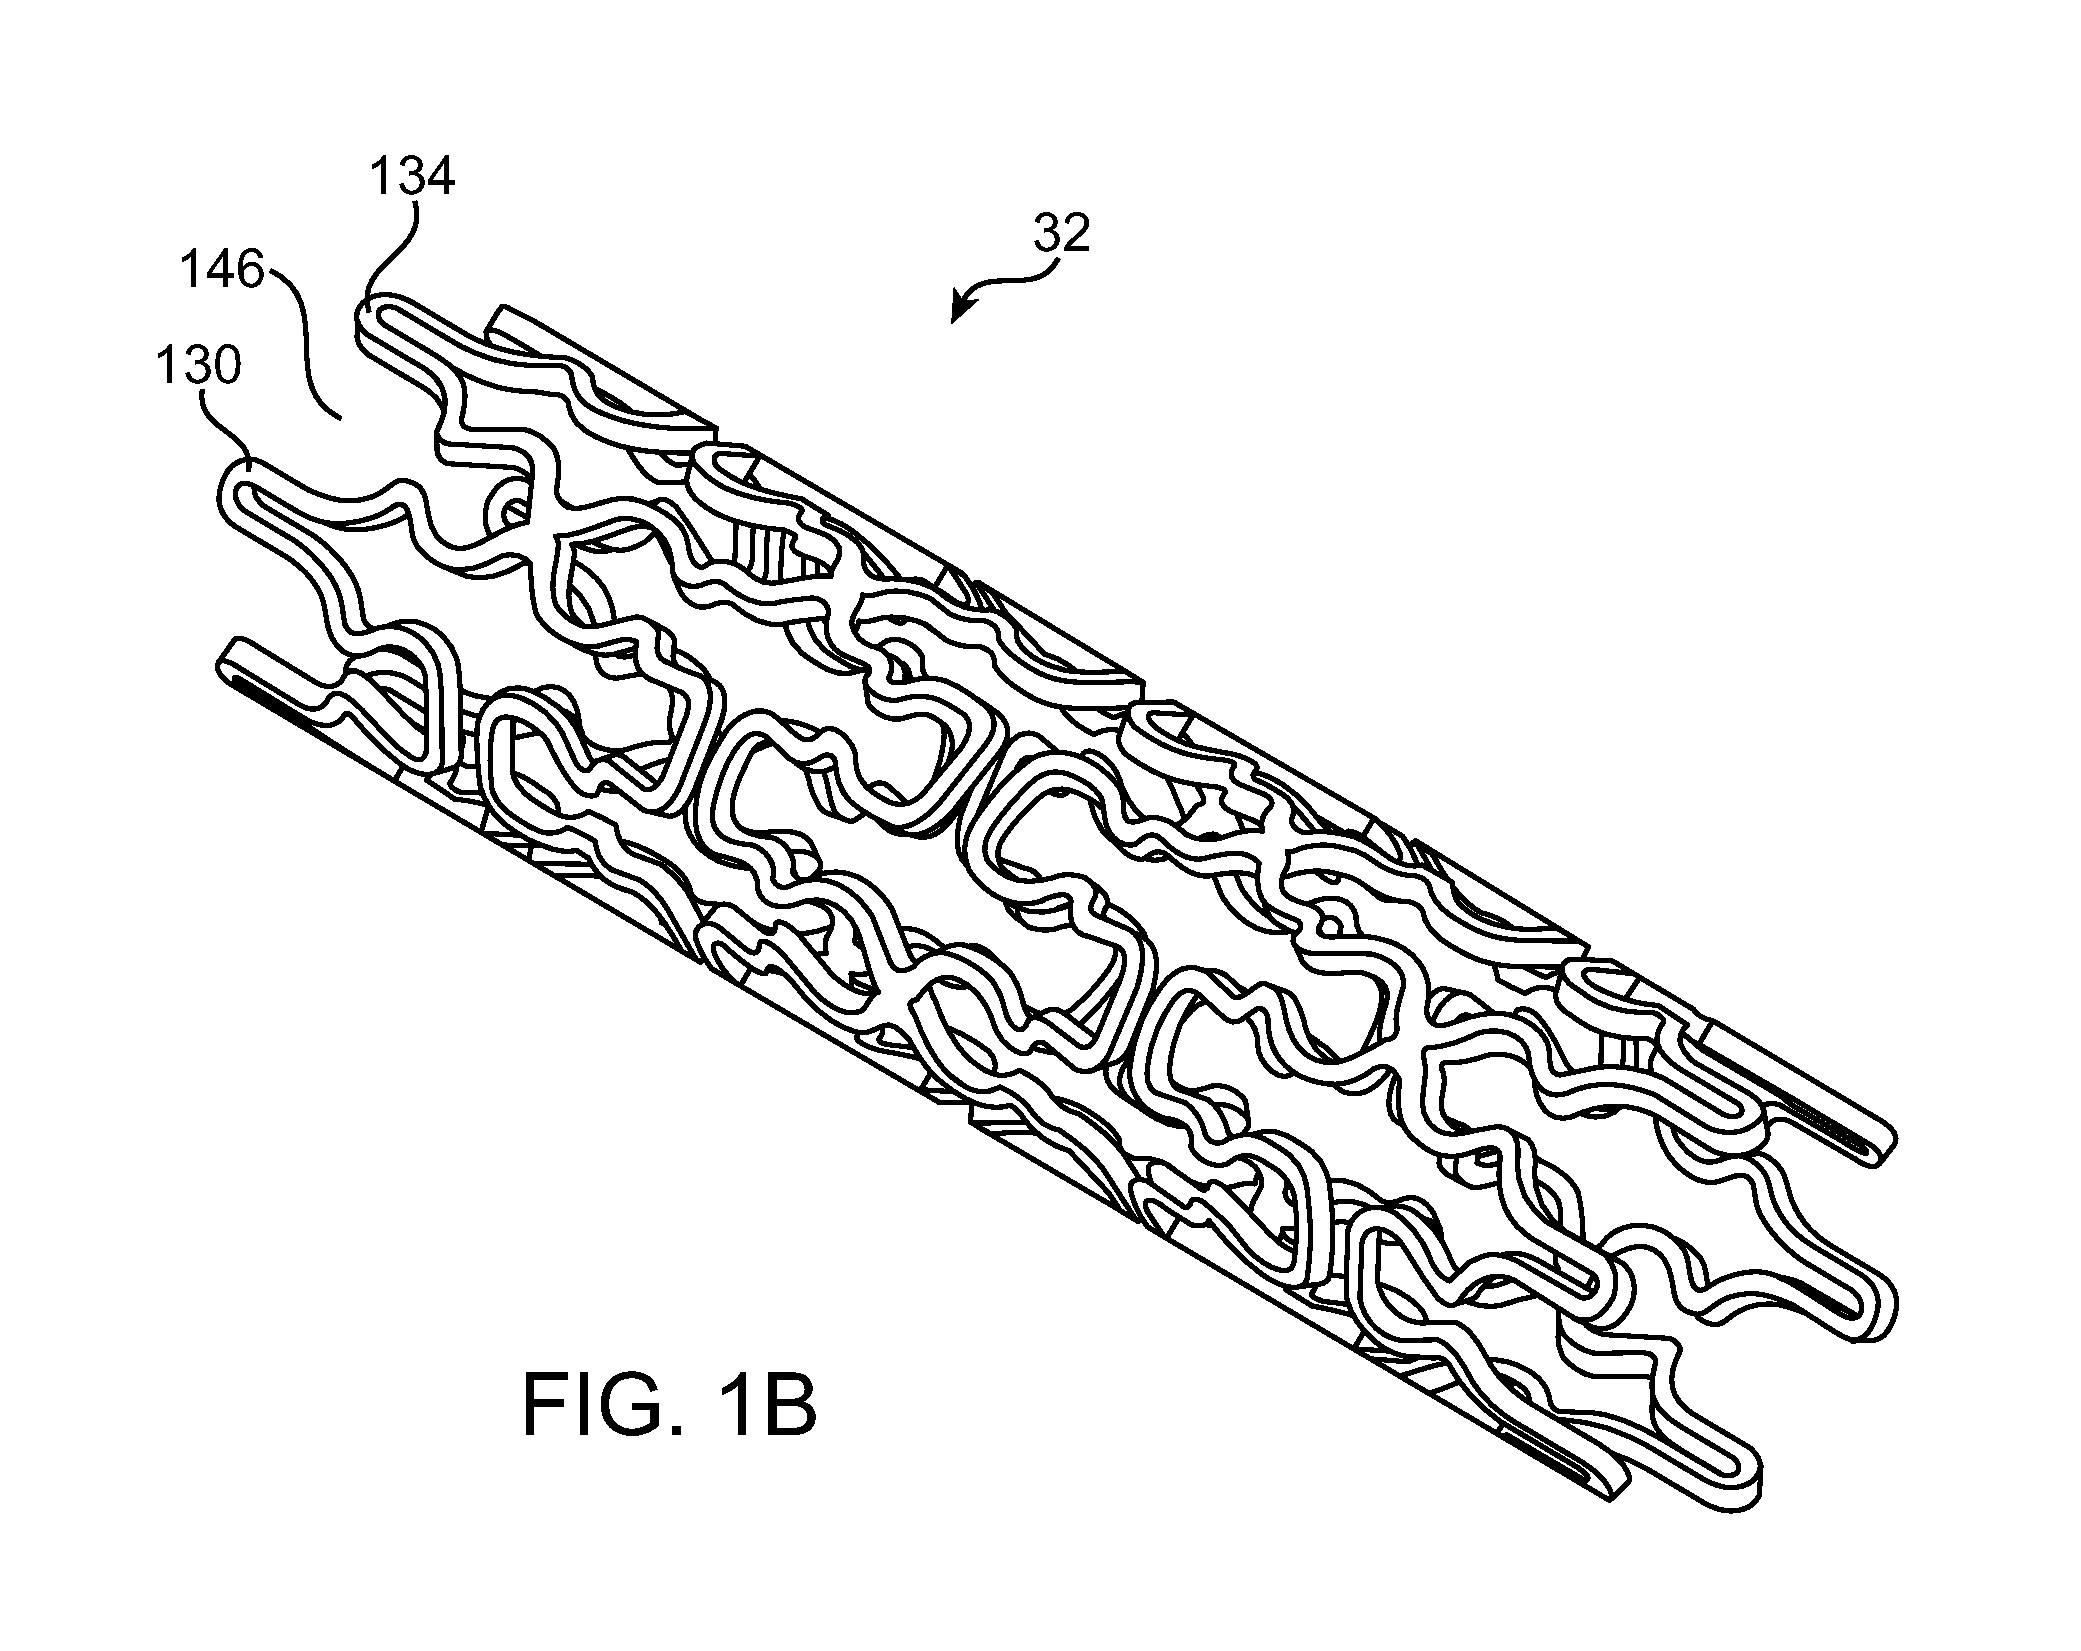 Use of Plasma in Formation of Biodegradable Stent Coating